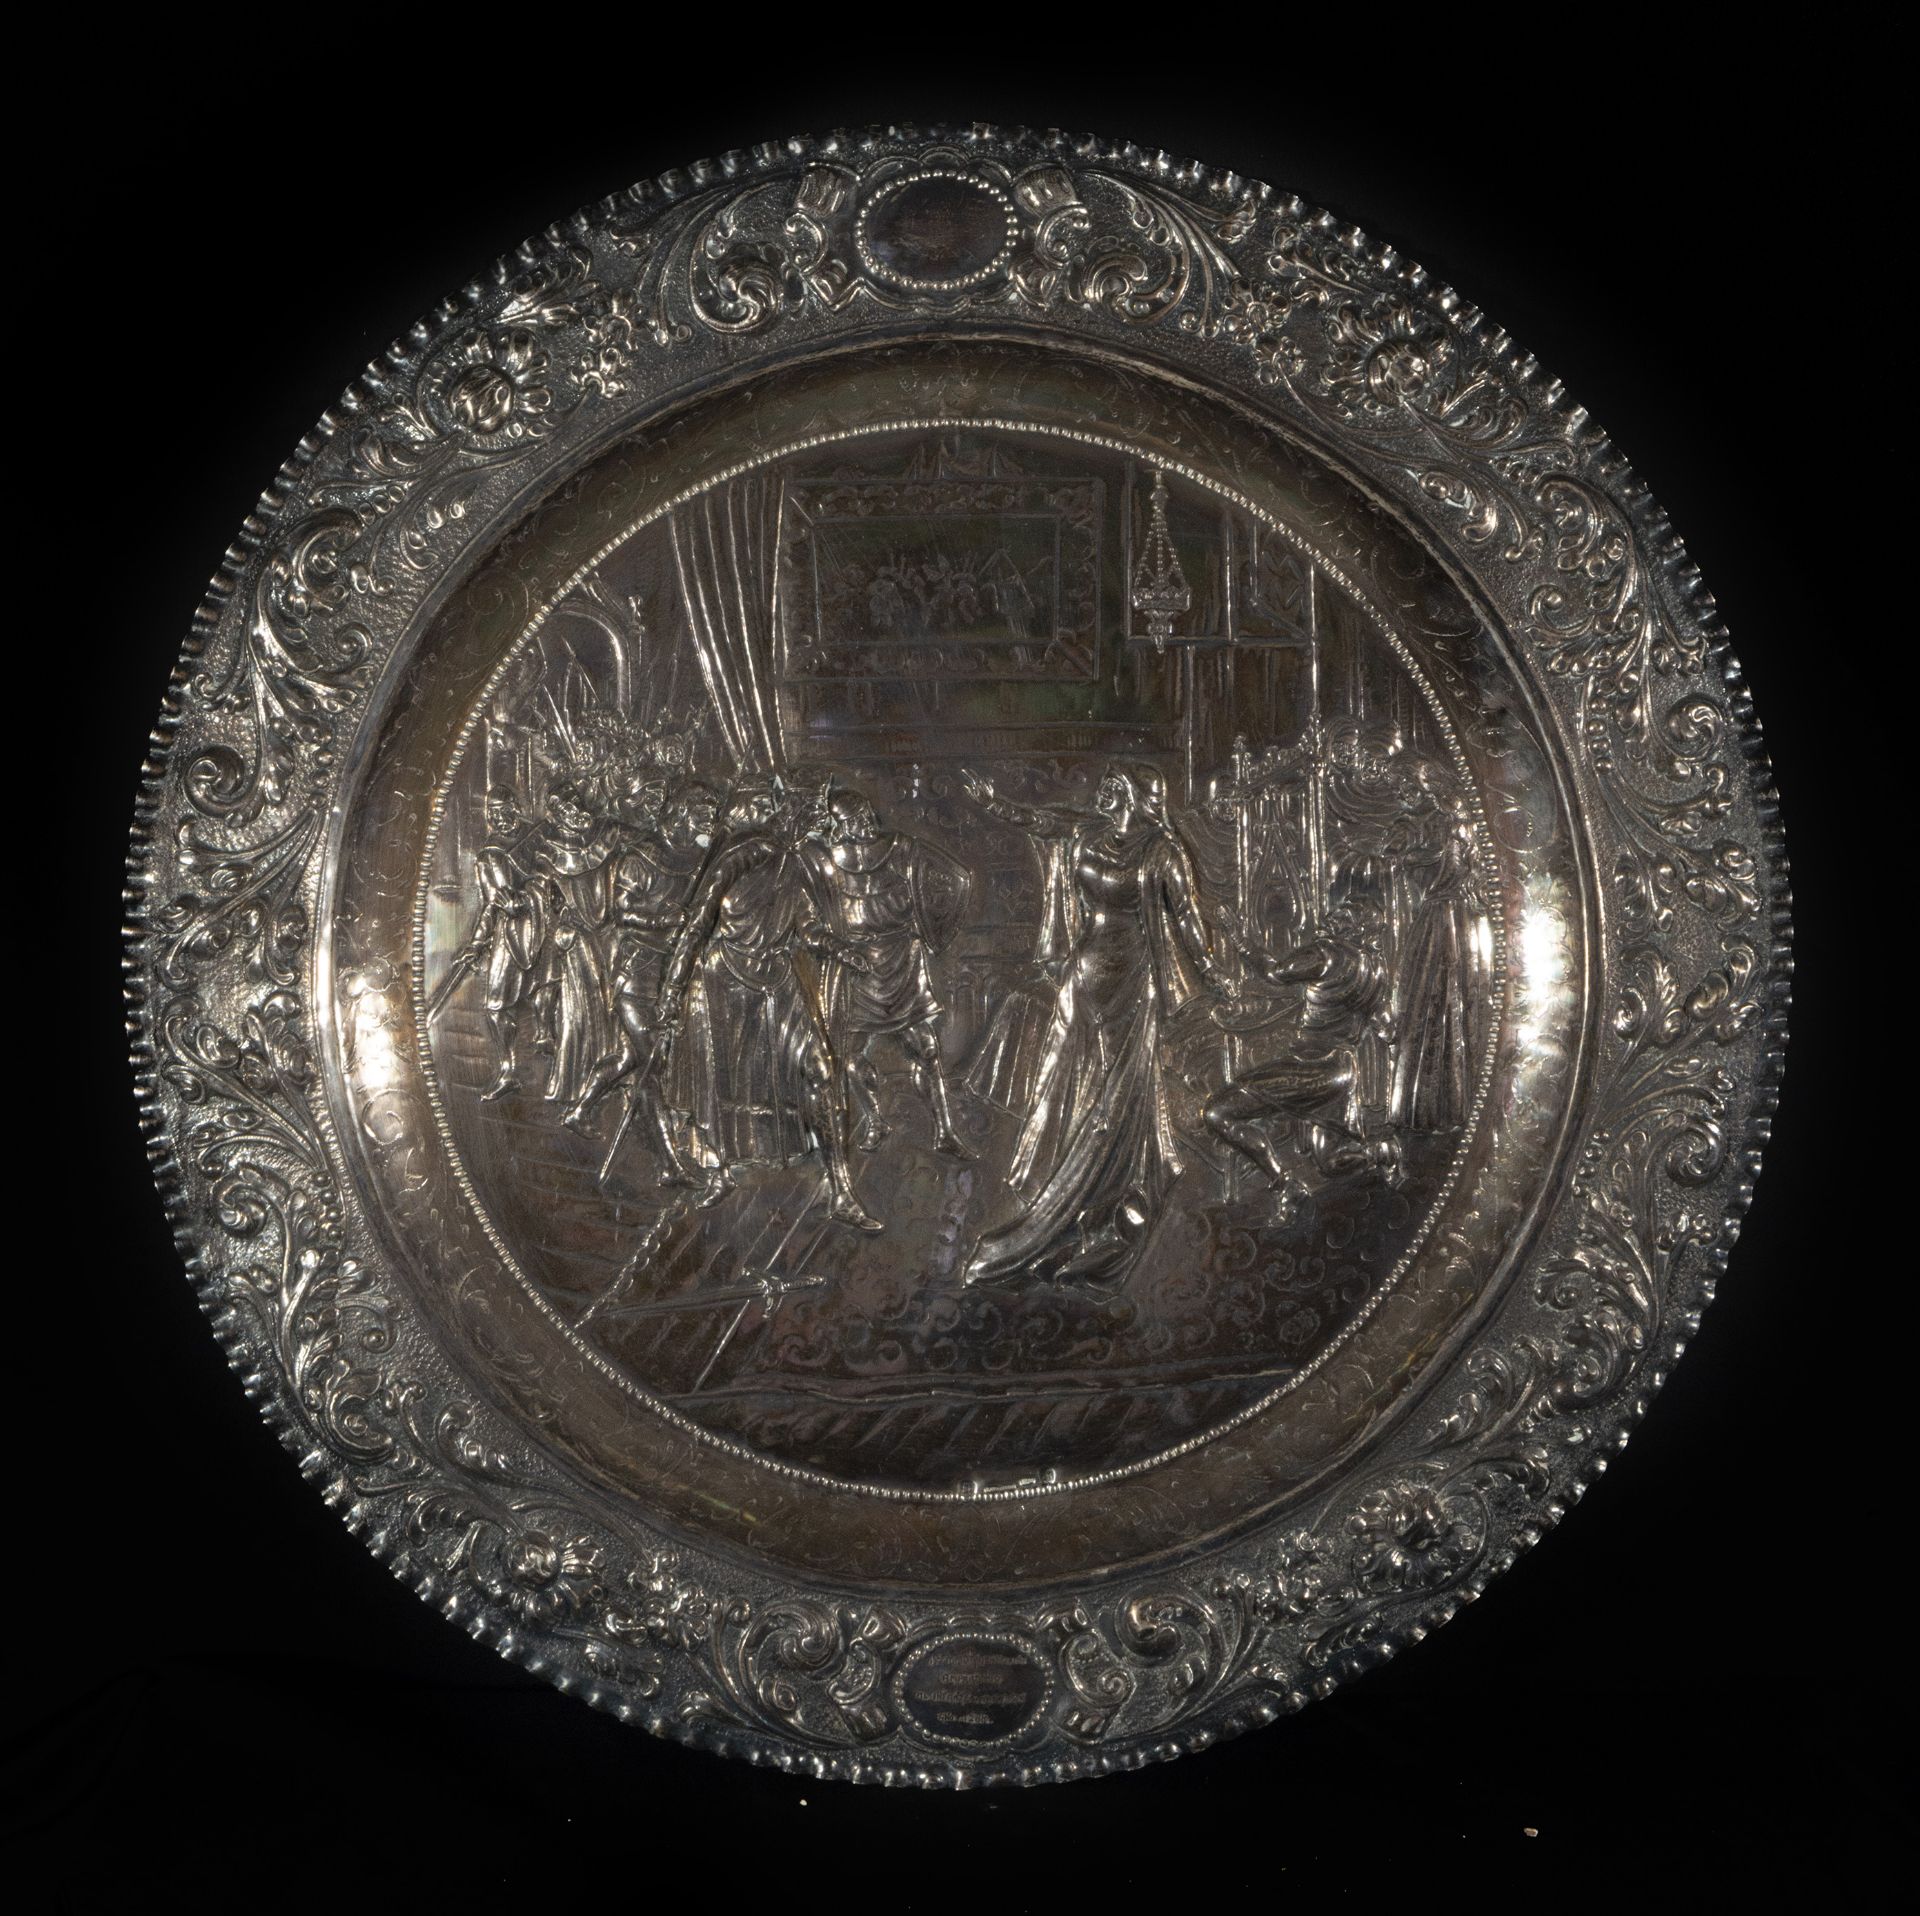 Fine silver plate from the 19th century with a central motif of the Catholic Monarchs